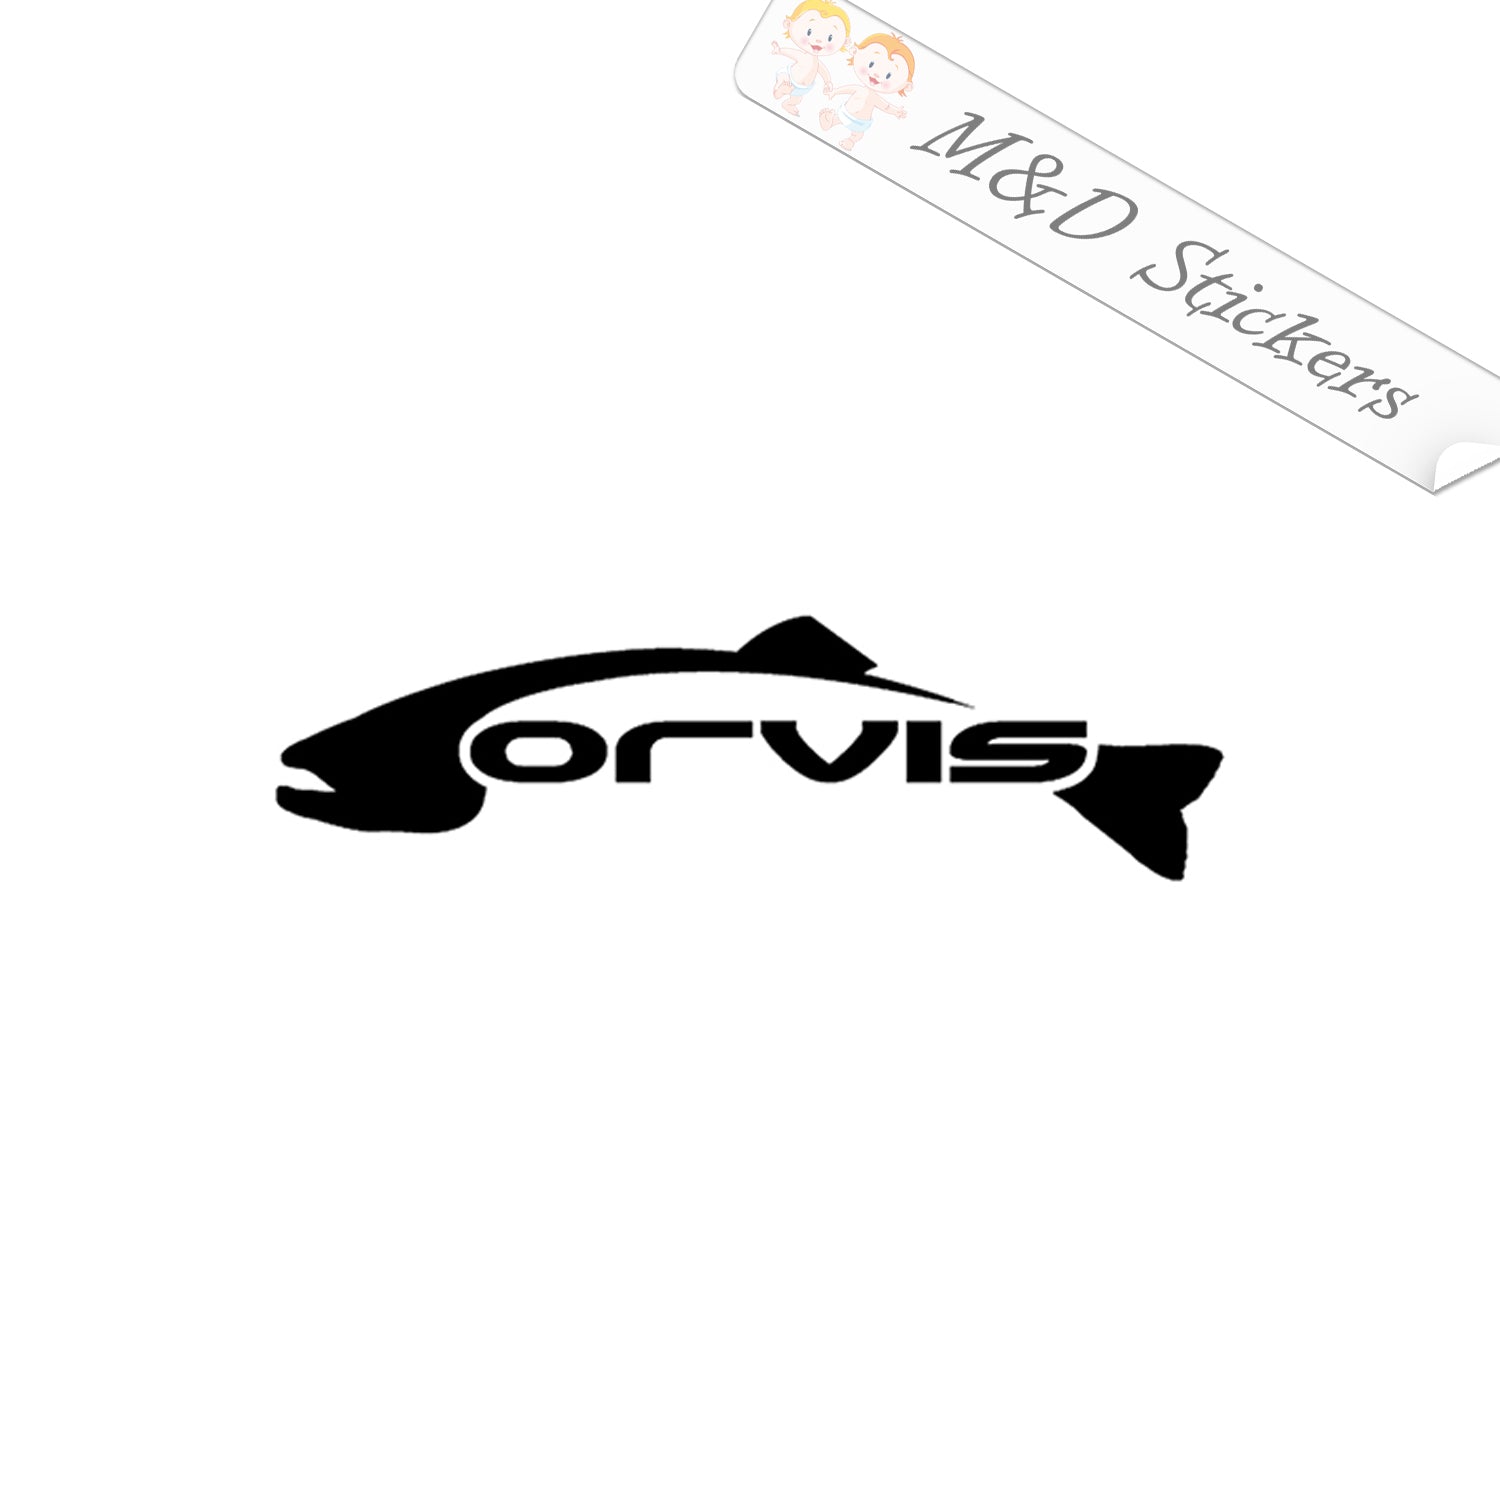 Orvis Salmon Fishing Rods (4.5 - 30) Vinyl Decal in Different